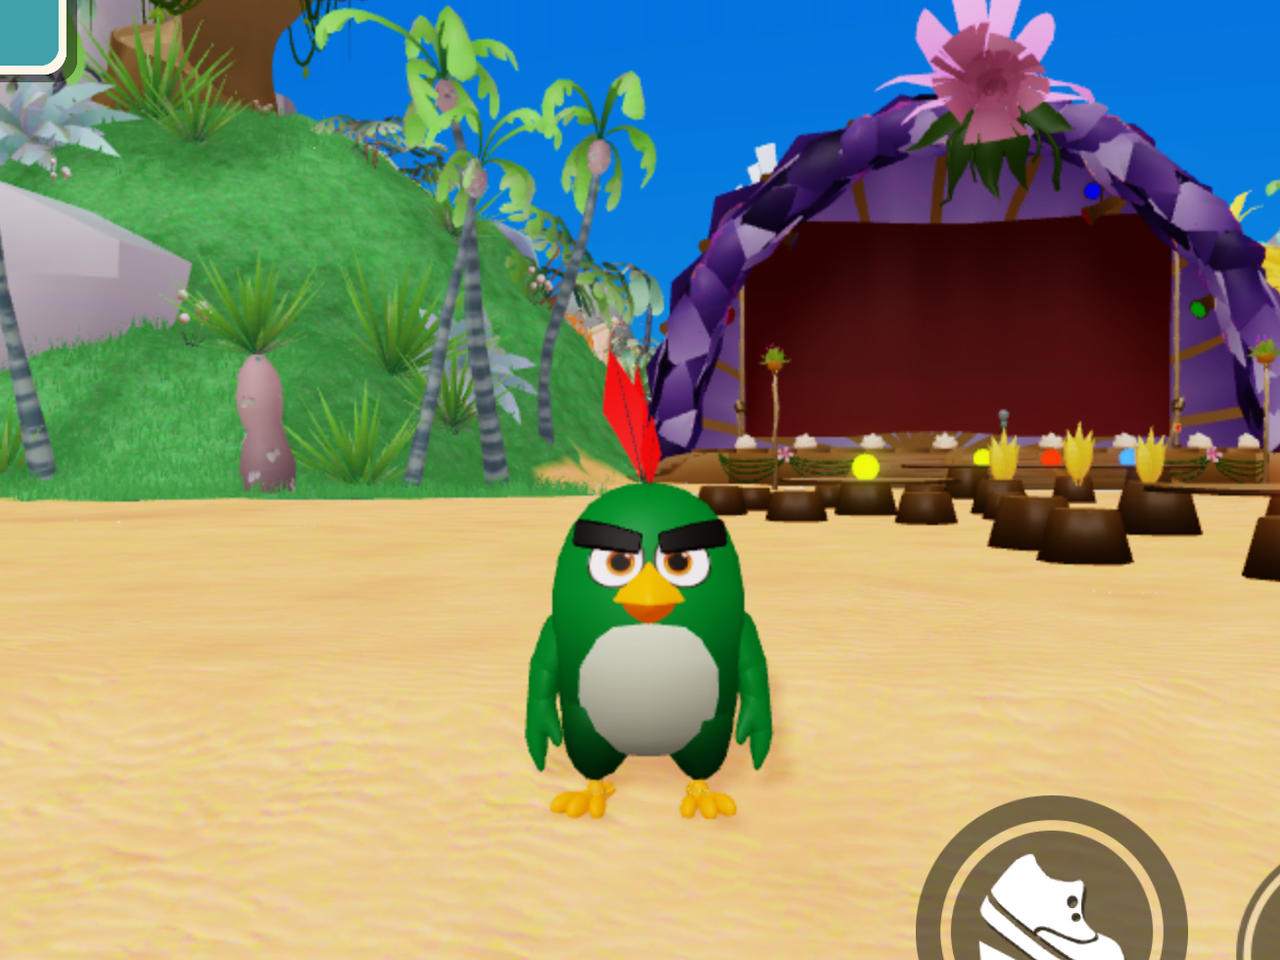 Me In Angry Birds Bird Island Roblox by StripeOfficialArt on DeviantArt